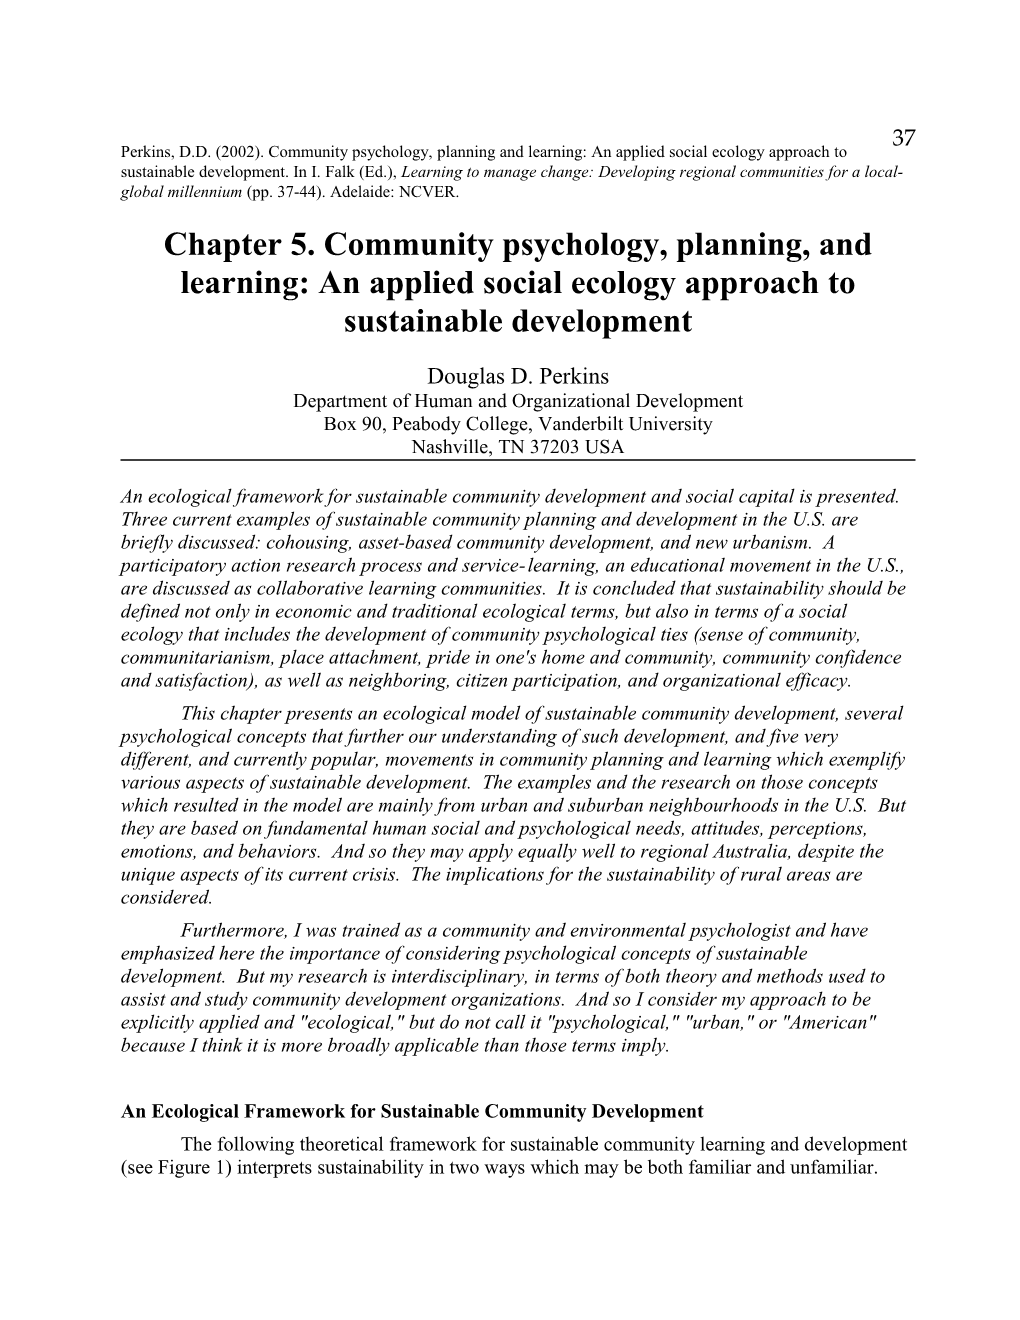 Chapter 5. Community Psychology, Planning, and Learning: an Applied Social Ecology Approach